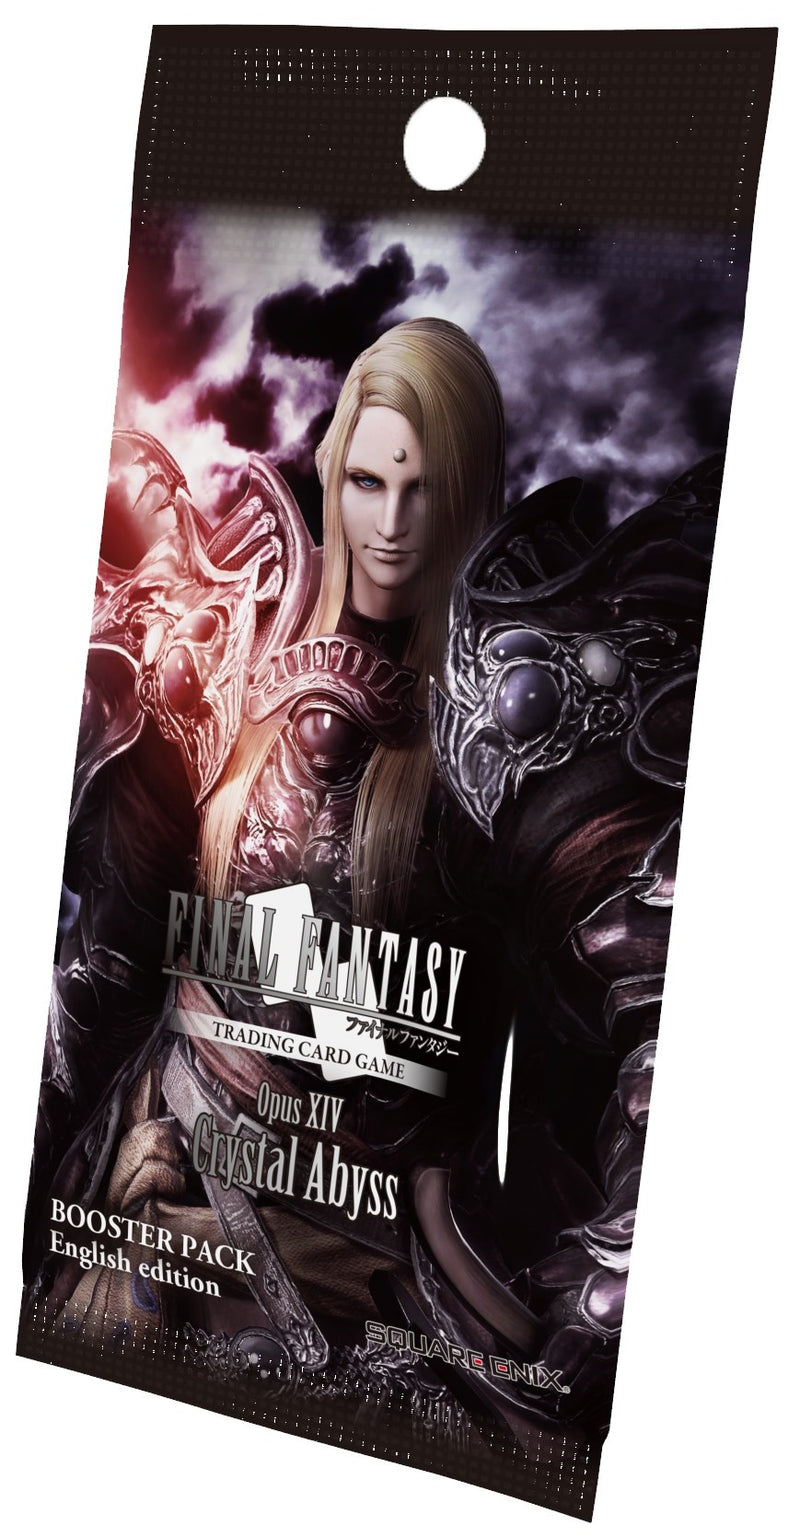 Final Fantasy TCG: Opus XIV Crystal Abyss Booster Pack